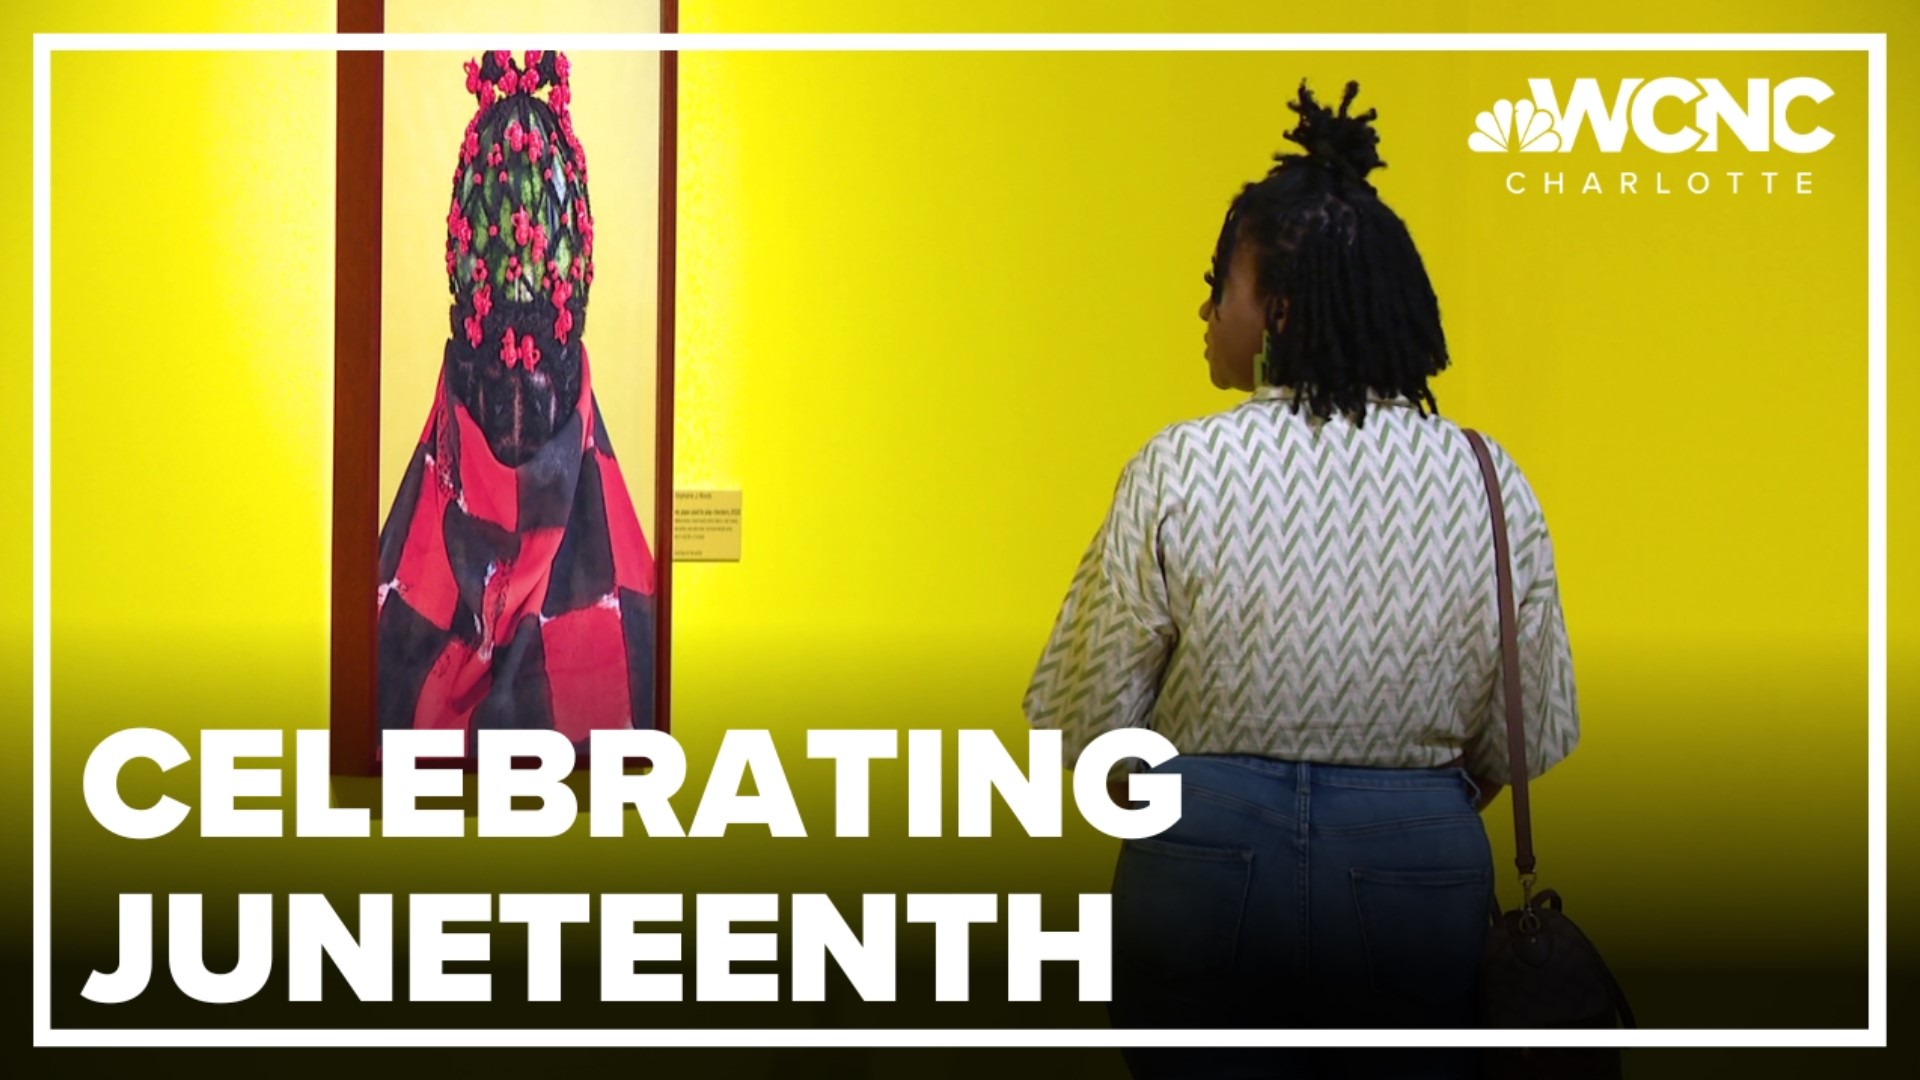 The Juneteenth event held at the Gannt Center invited everyone to come and learn about Black culture and the history surrounding the holiday.